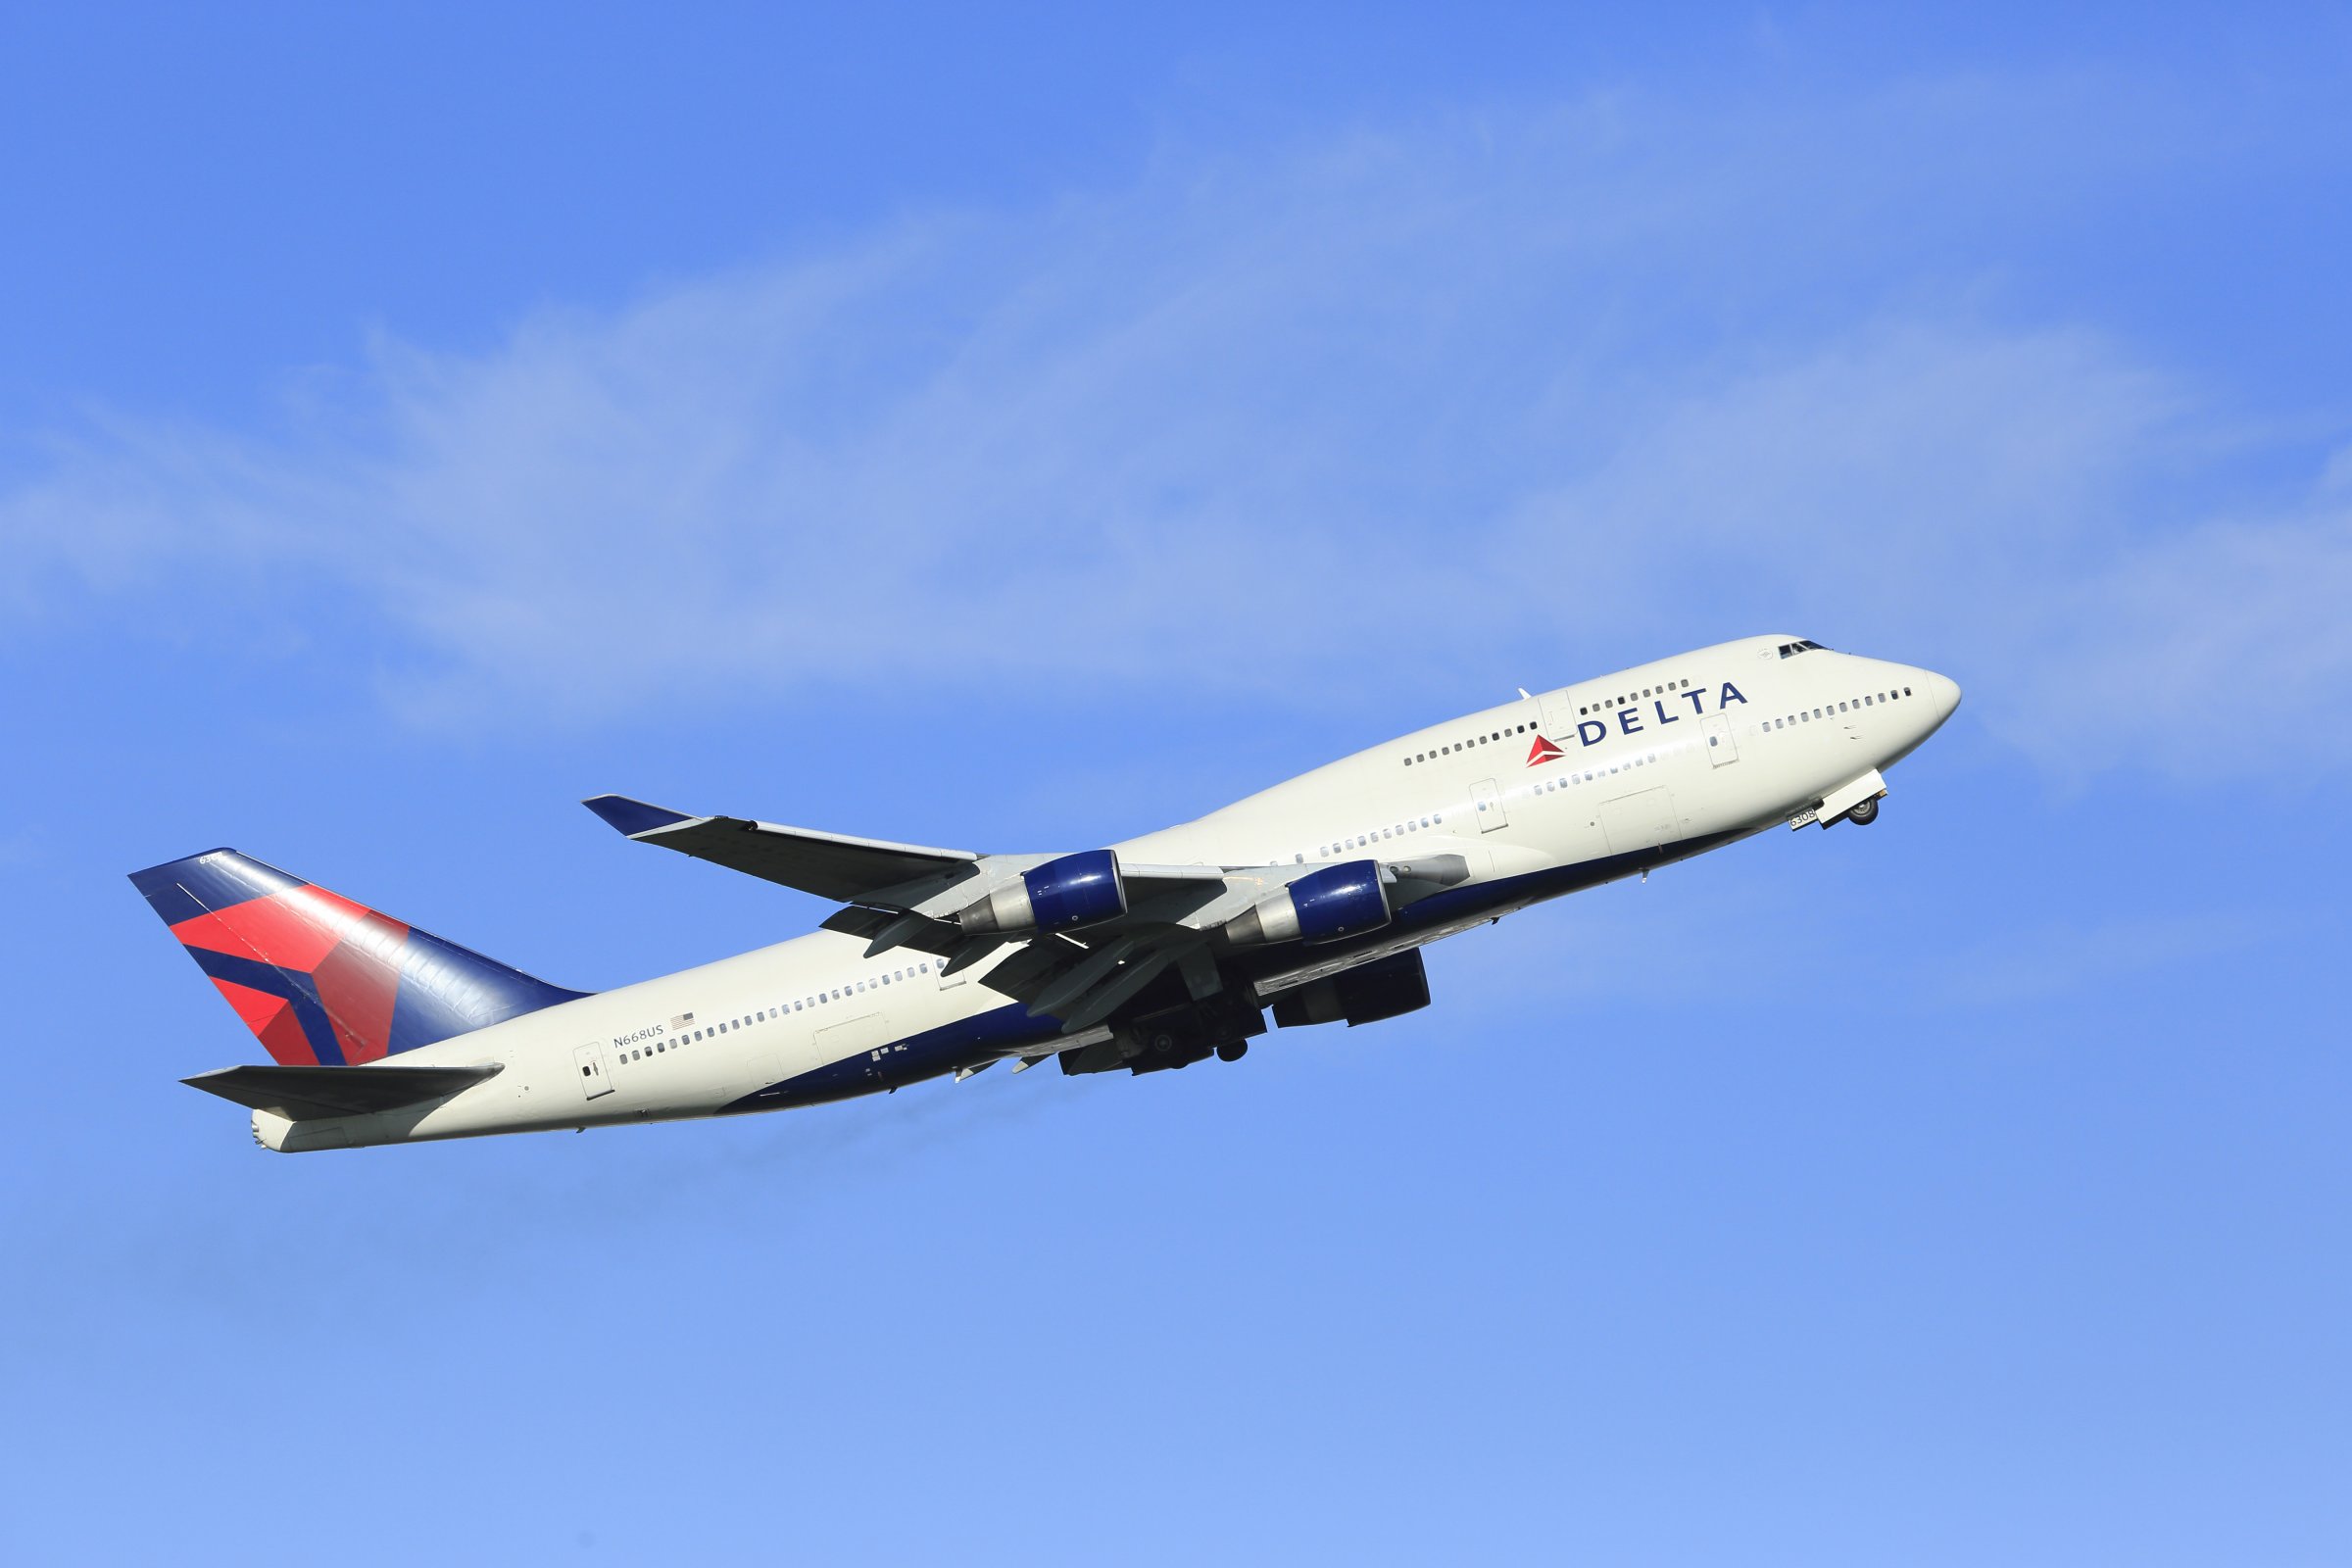 A Delta Airlines plane is seen flying in Japan.